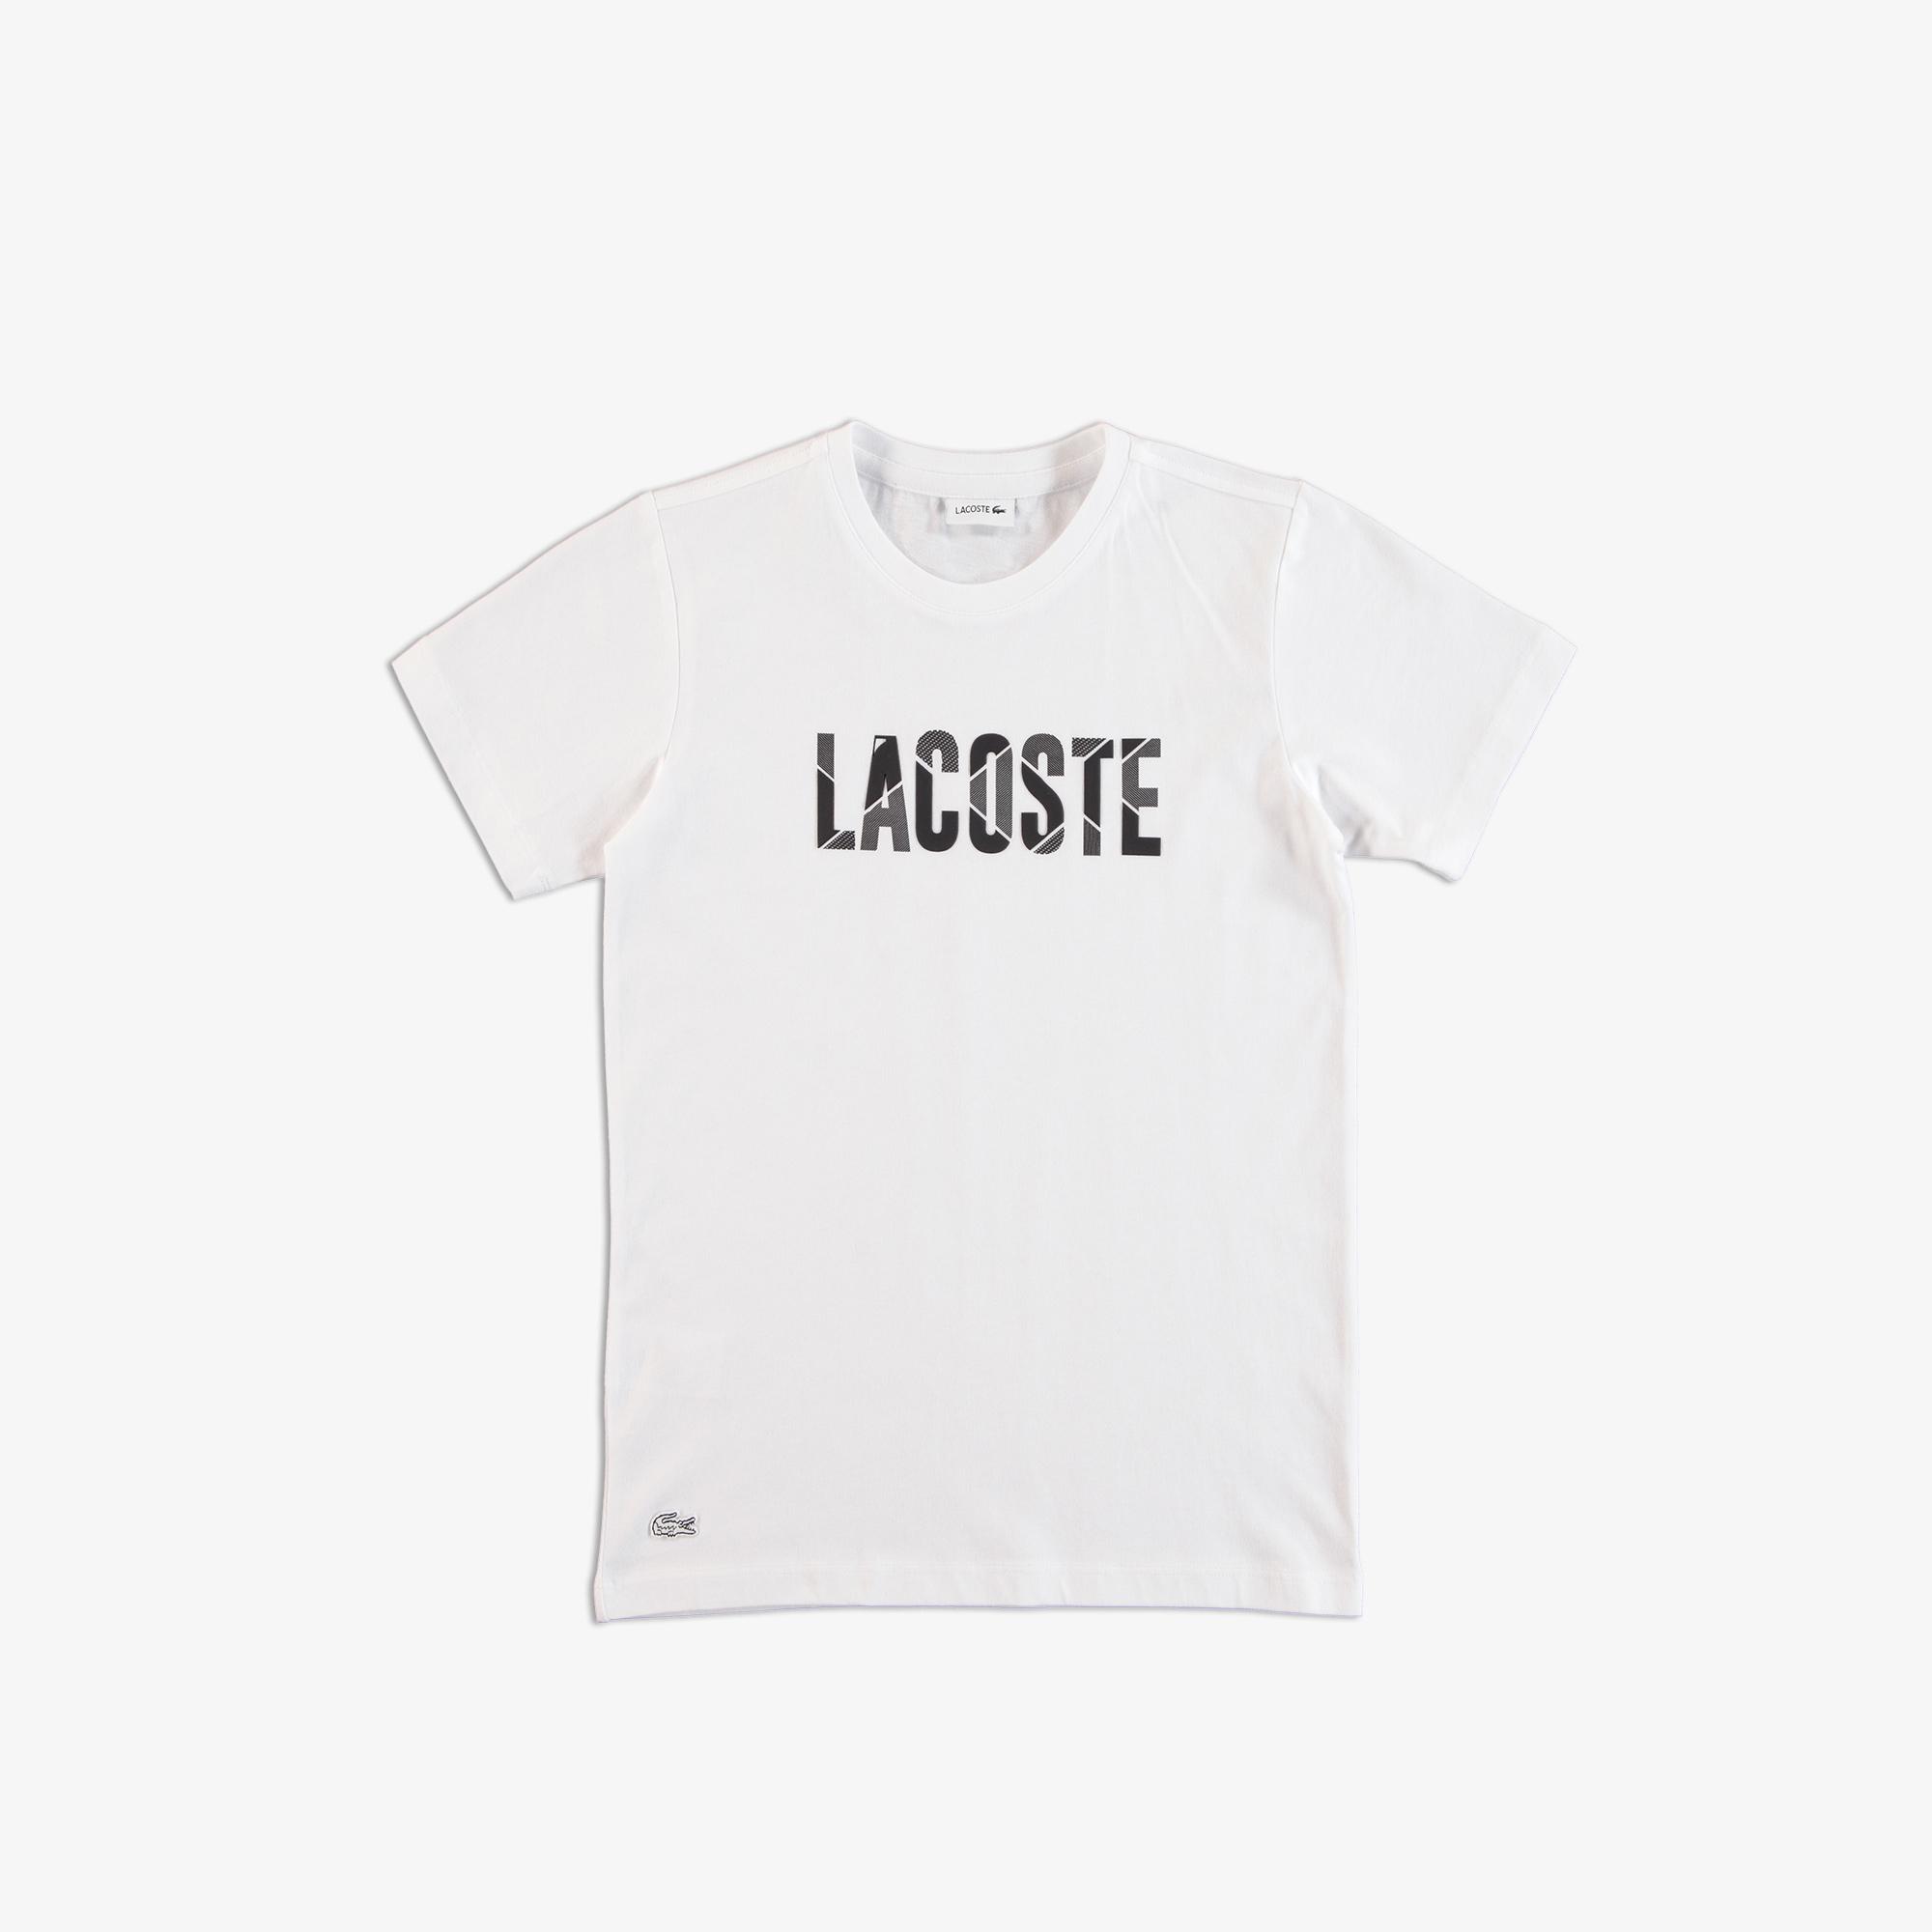 Lacoste Kids Crew Neck Printed T-Shirt